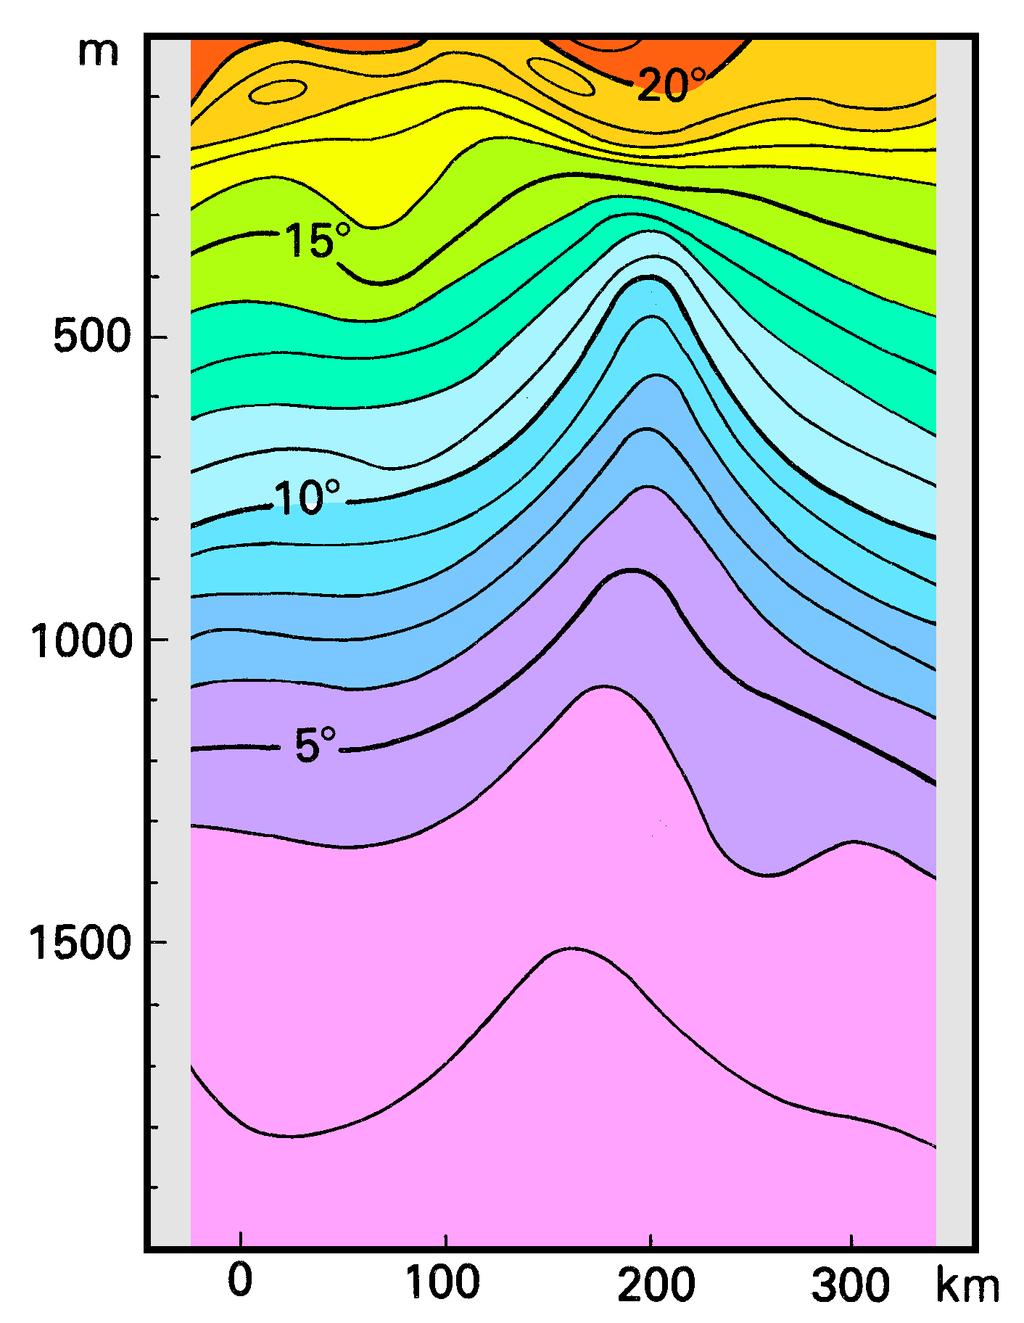 190 Regional Oceanography: an Introduction Entrainment of water from the loop increases the net southward flow to 15 Sv near 20 S.